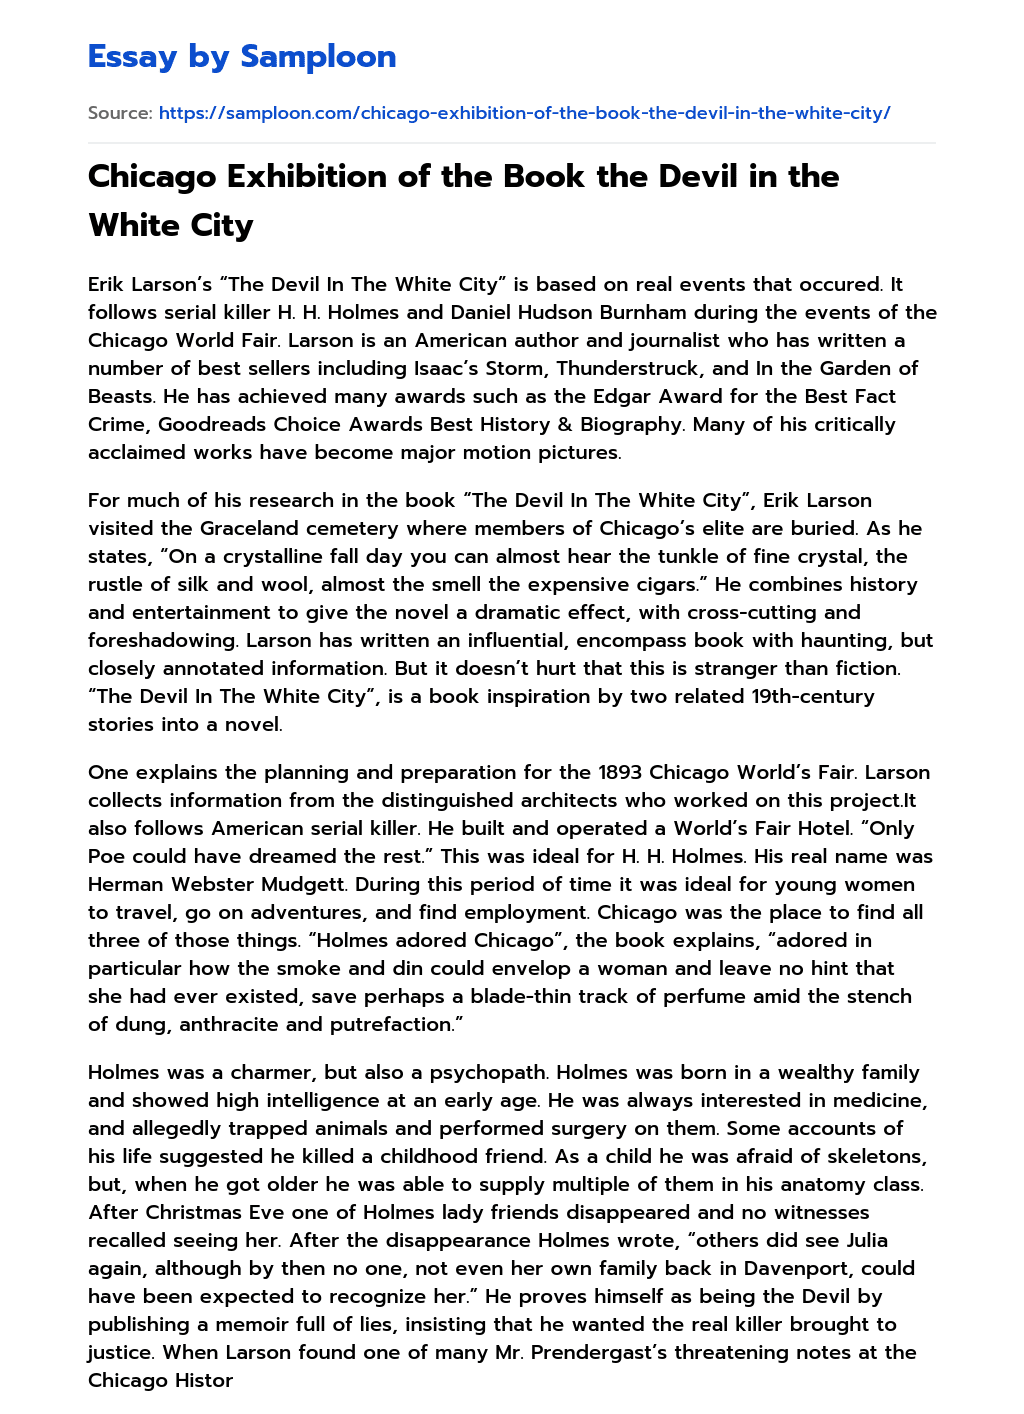 Chicago Exhibition of the Book the Devil in the White City essay